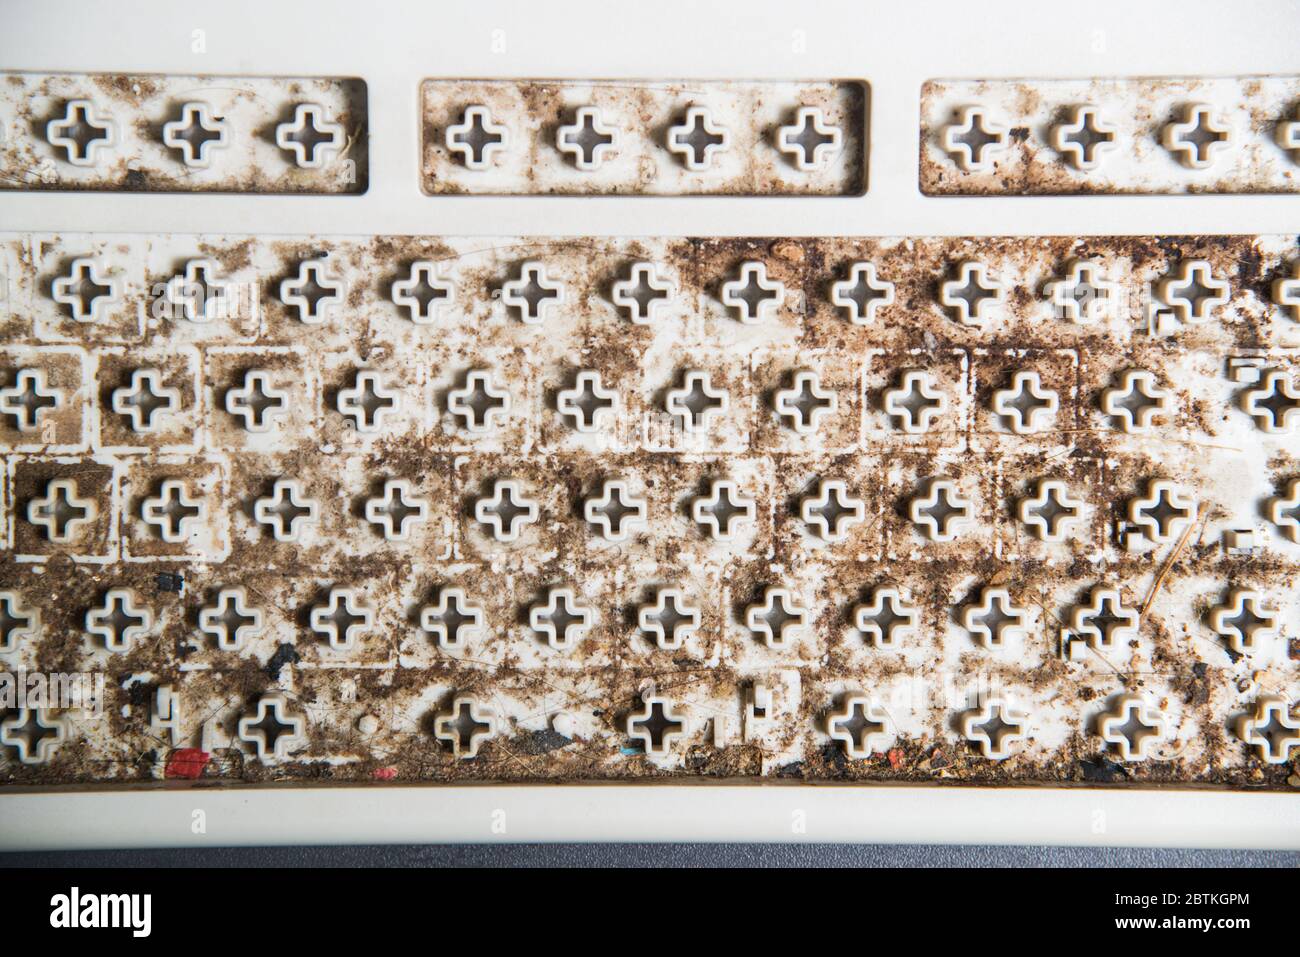 Dirty stain under the keypad of keyboard computer, unsightly and unclean equipment in office. Stock Photo